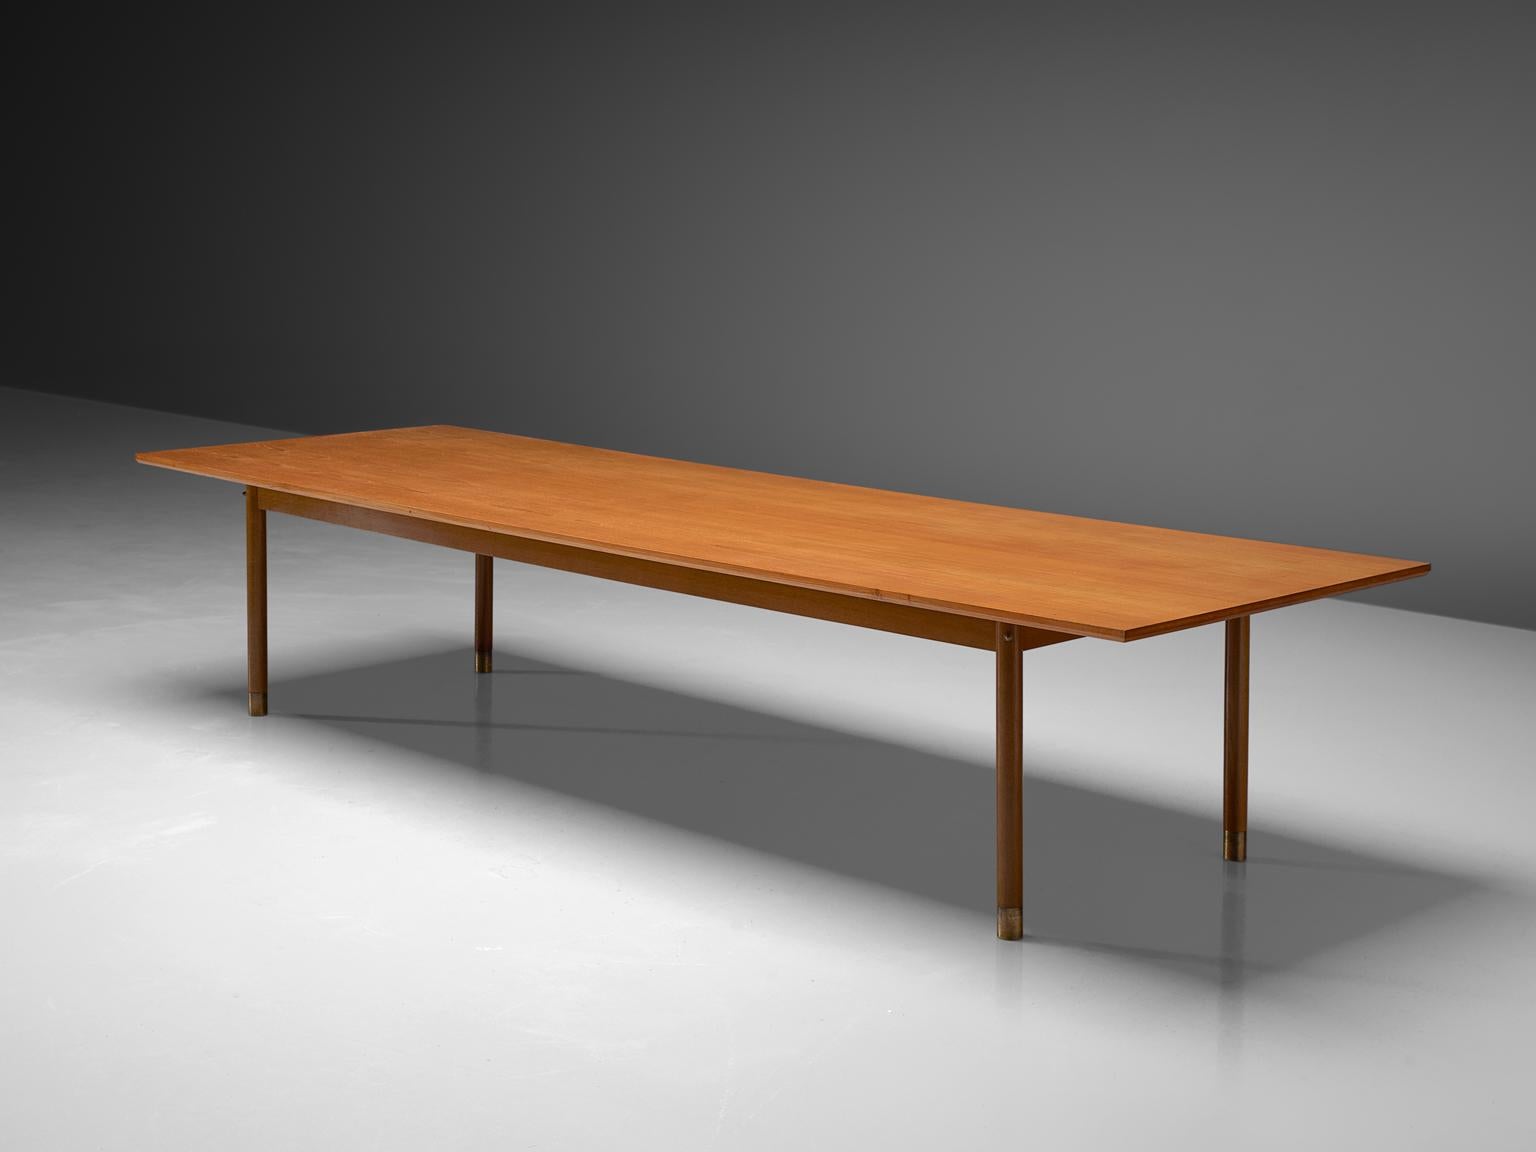 Large conference table in teak, Denmark, 1960s.

This well proportioned table has a straight shaped top and it made out of one-piece, it features straight edges and four straight legs with brass feet. The clear shape of the top and the wonderful,